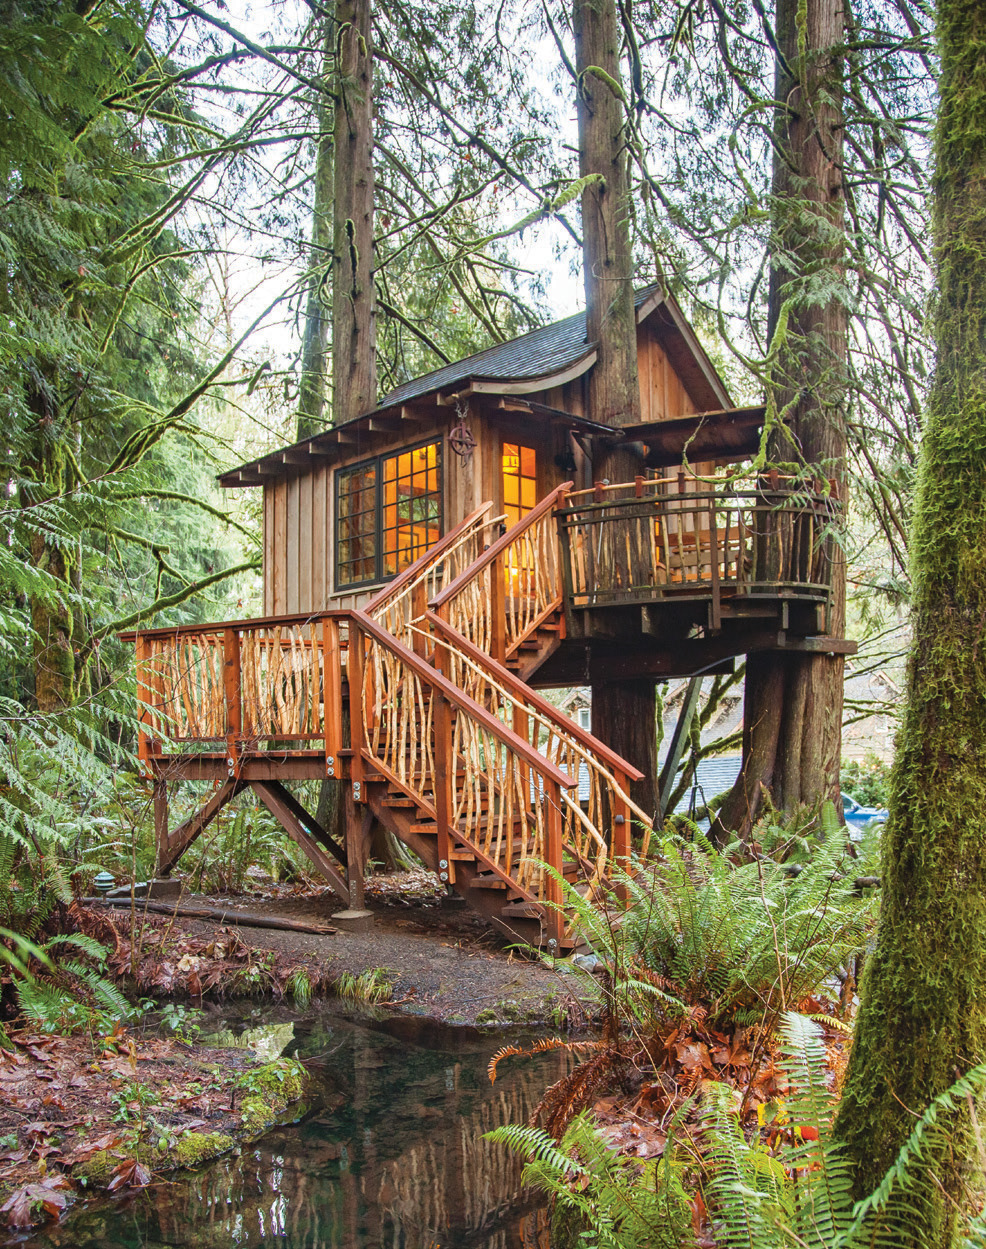 Upper Pond Treehouse, overlooking the tranquil pond, is surprisingly spacious.